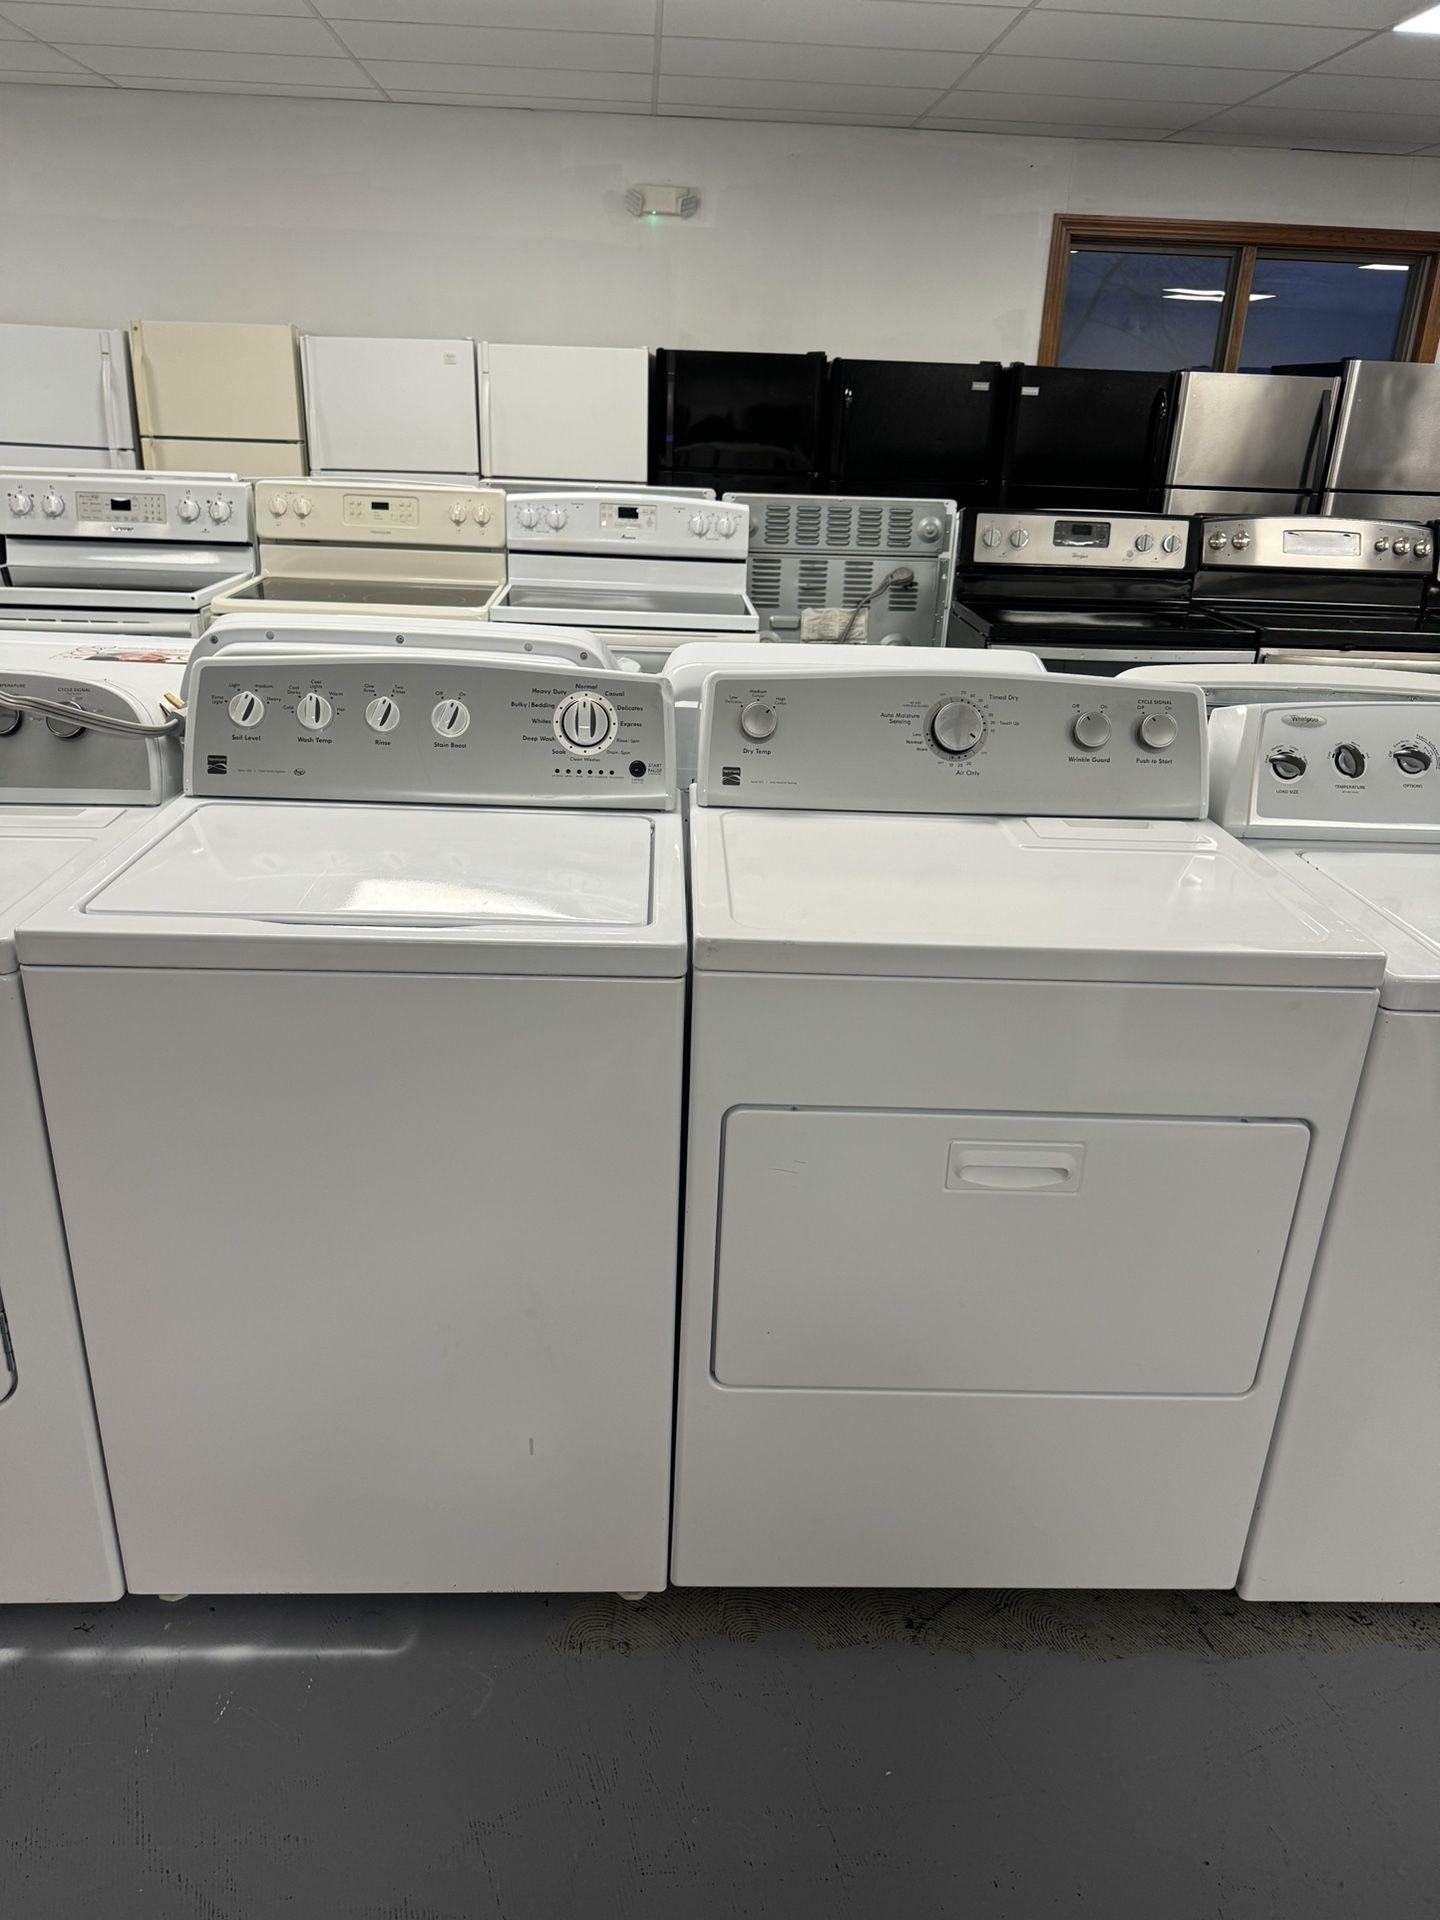 Large Capacity Electric Washer And Dryer Set used as New Works Perfectly 1216 Hartford Turnpike Vernon CT 